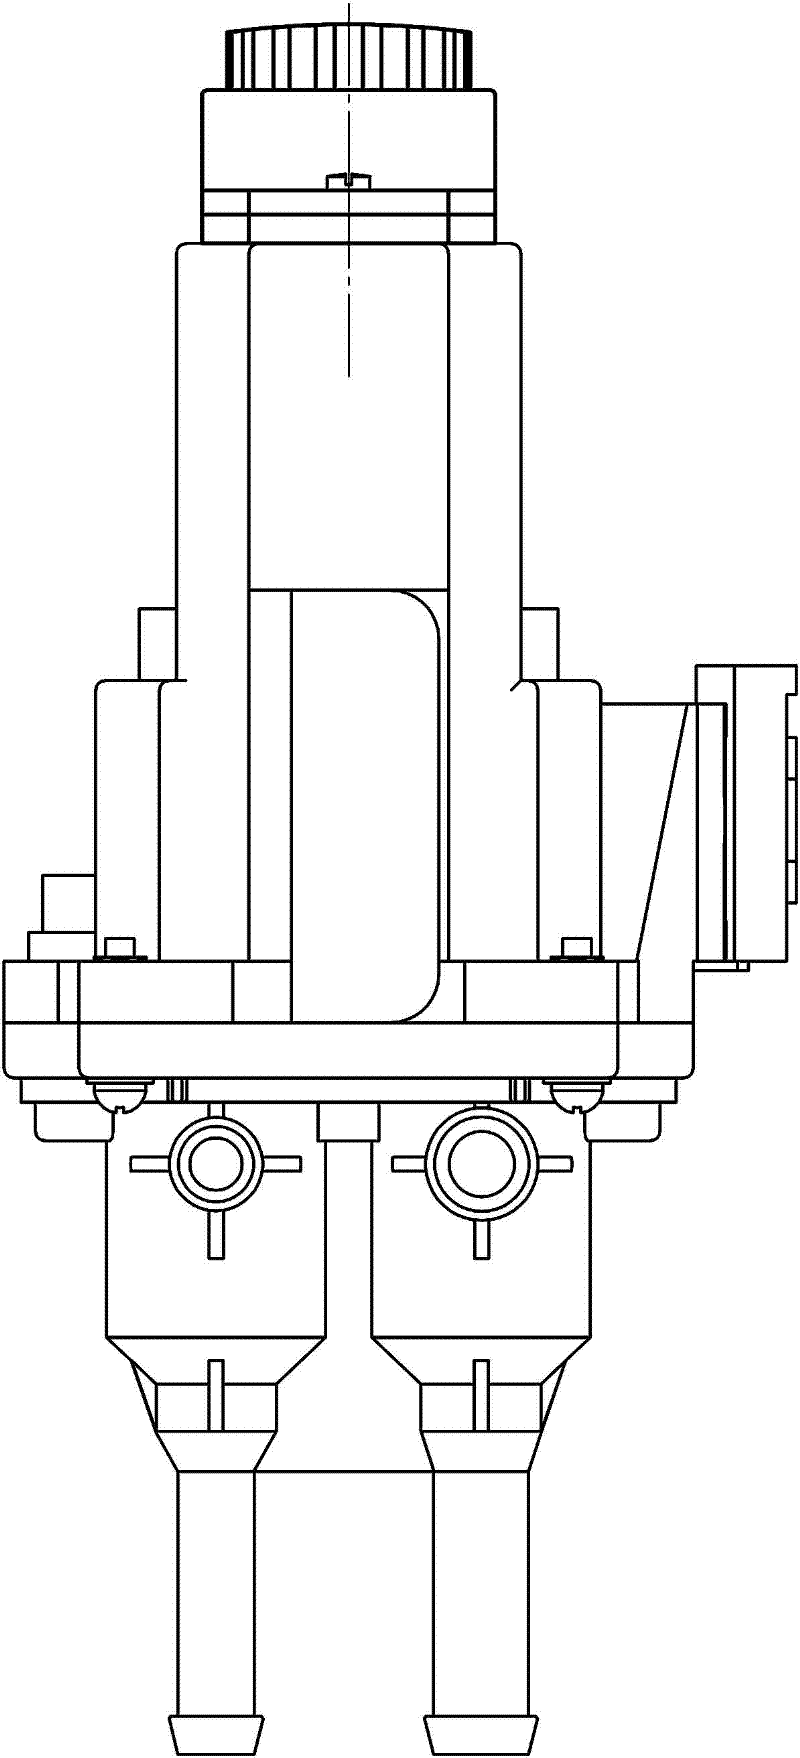 Emergent manual car main and secondary oil tank conversion valve